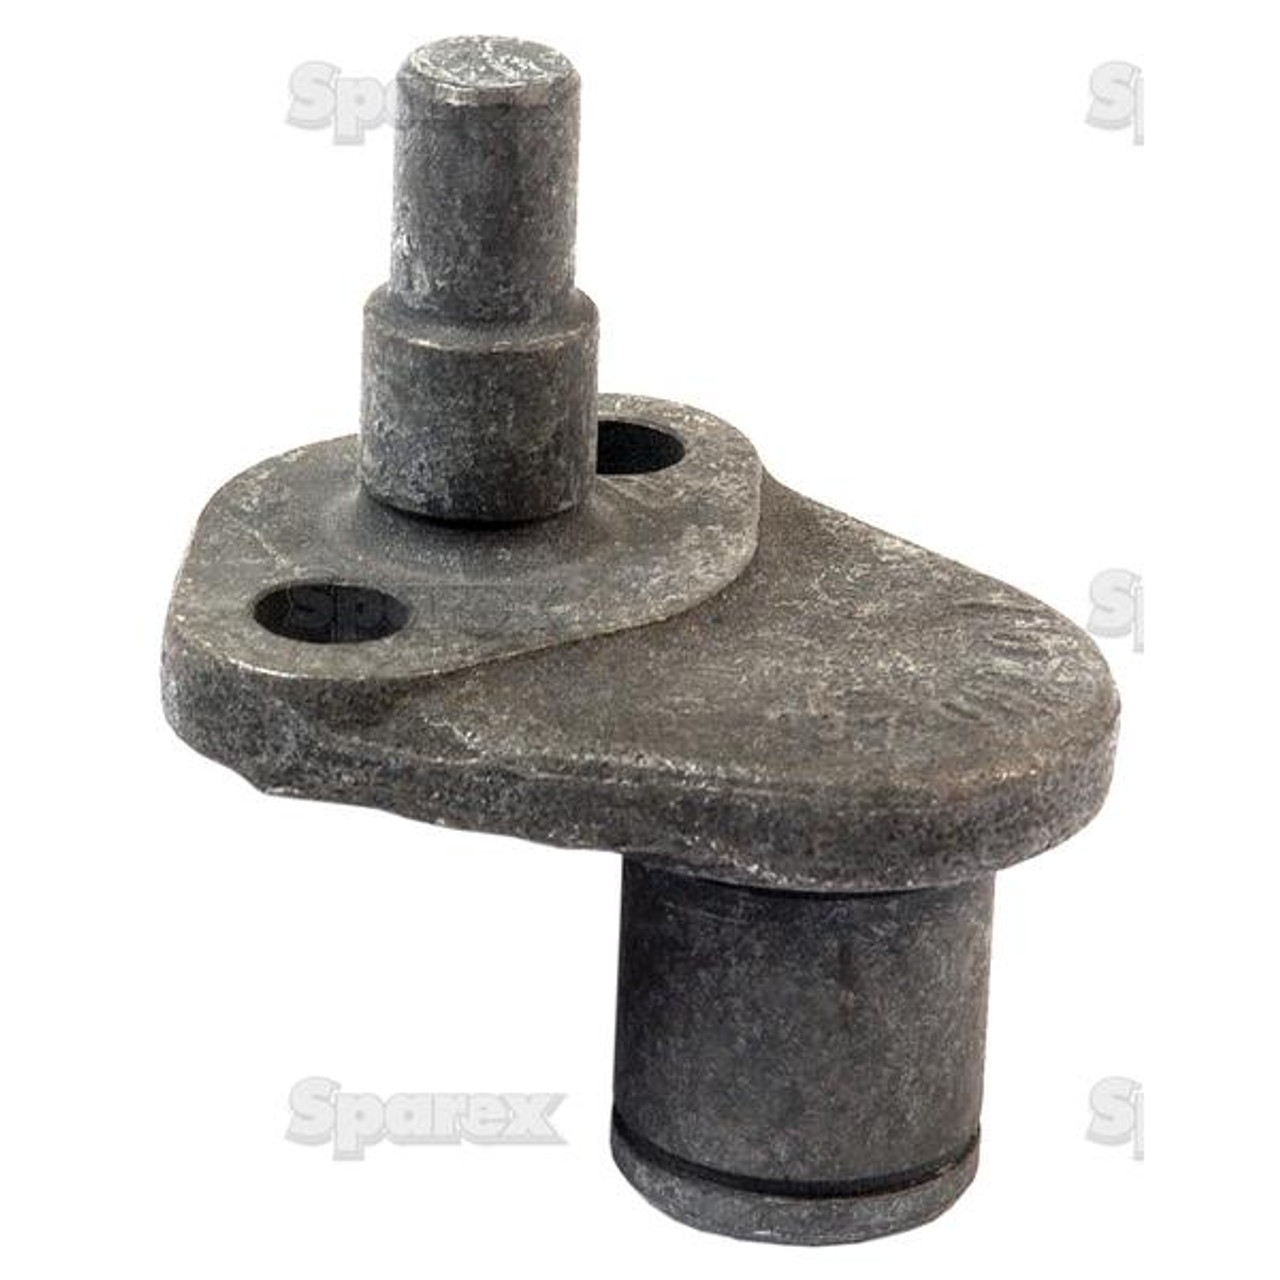 Tractor  SUPPORT PEG, 898937M1 Part Number S42027